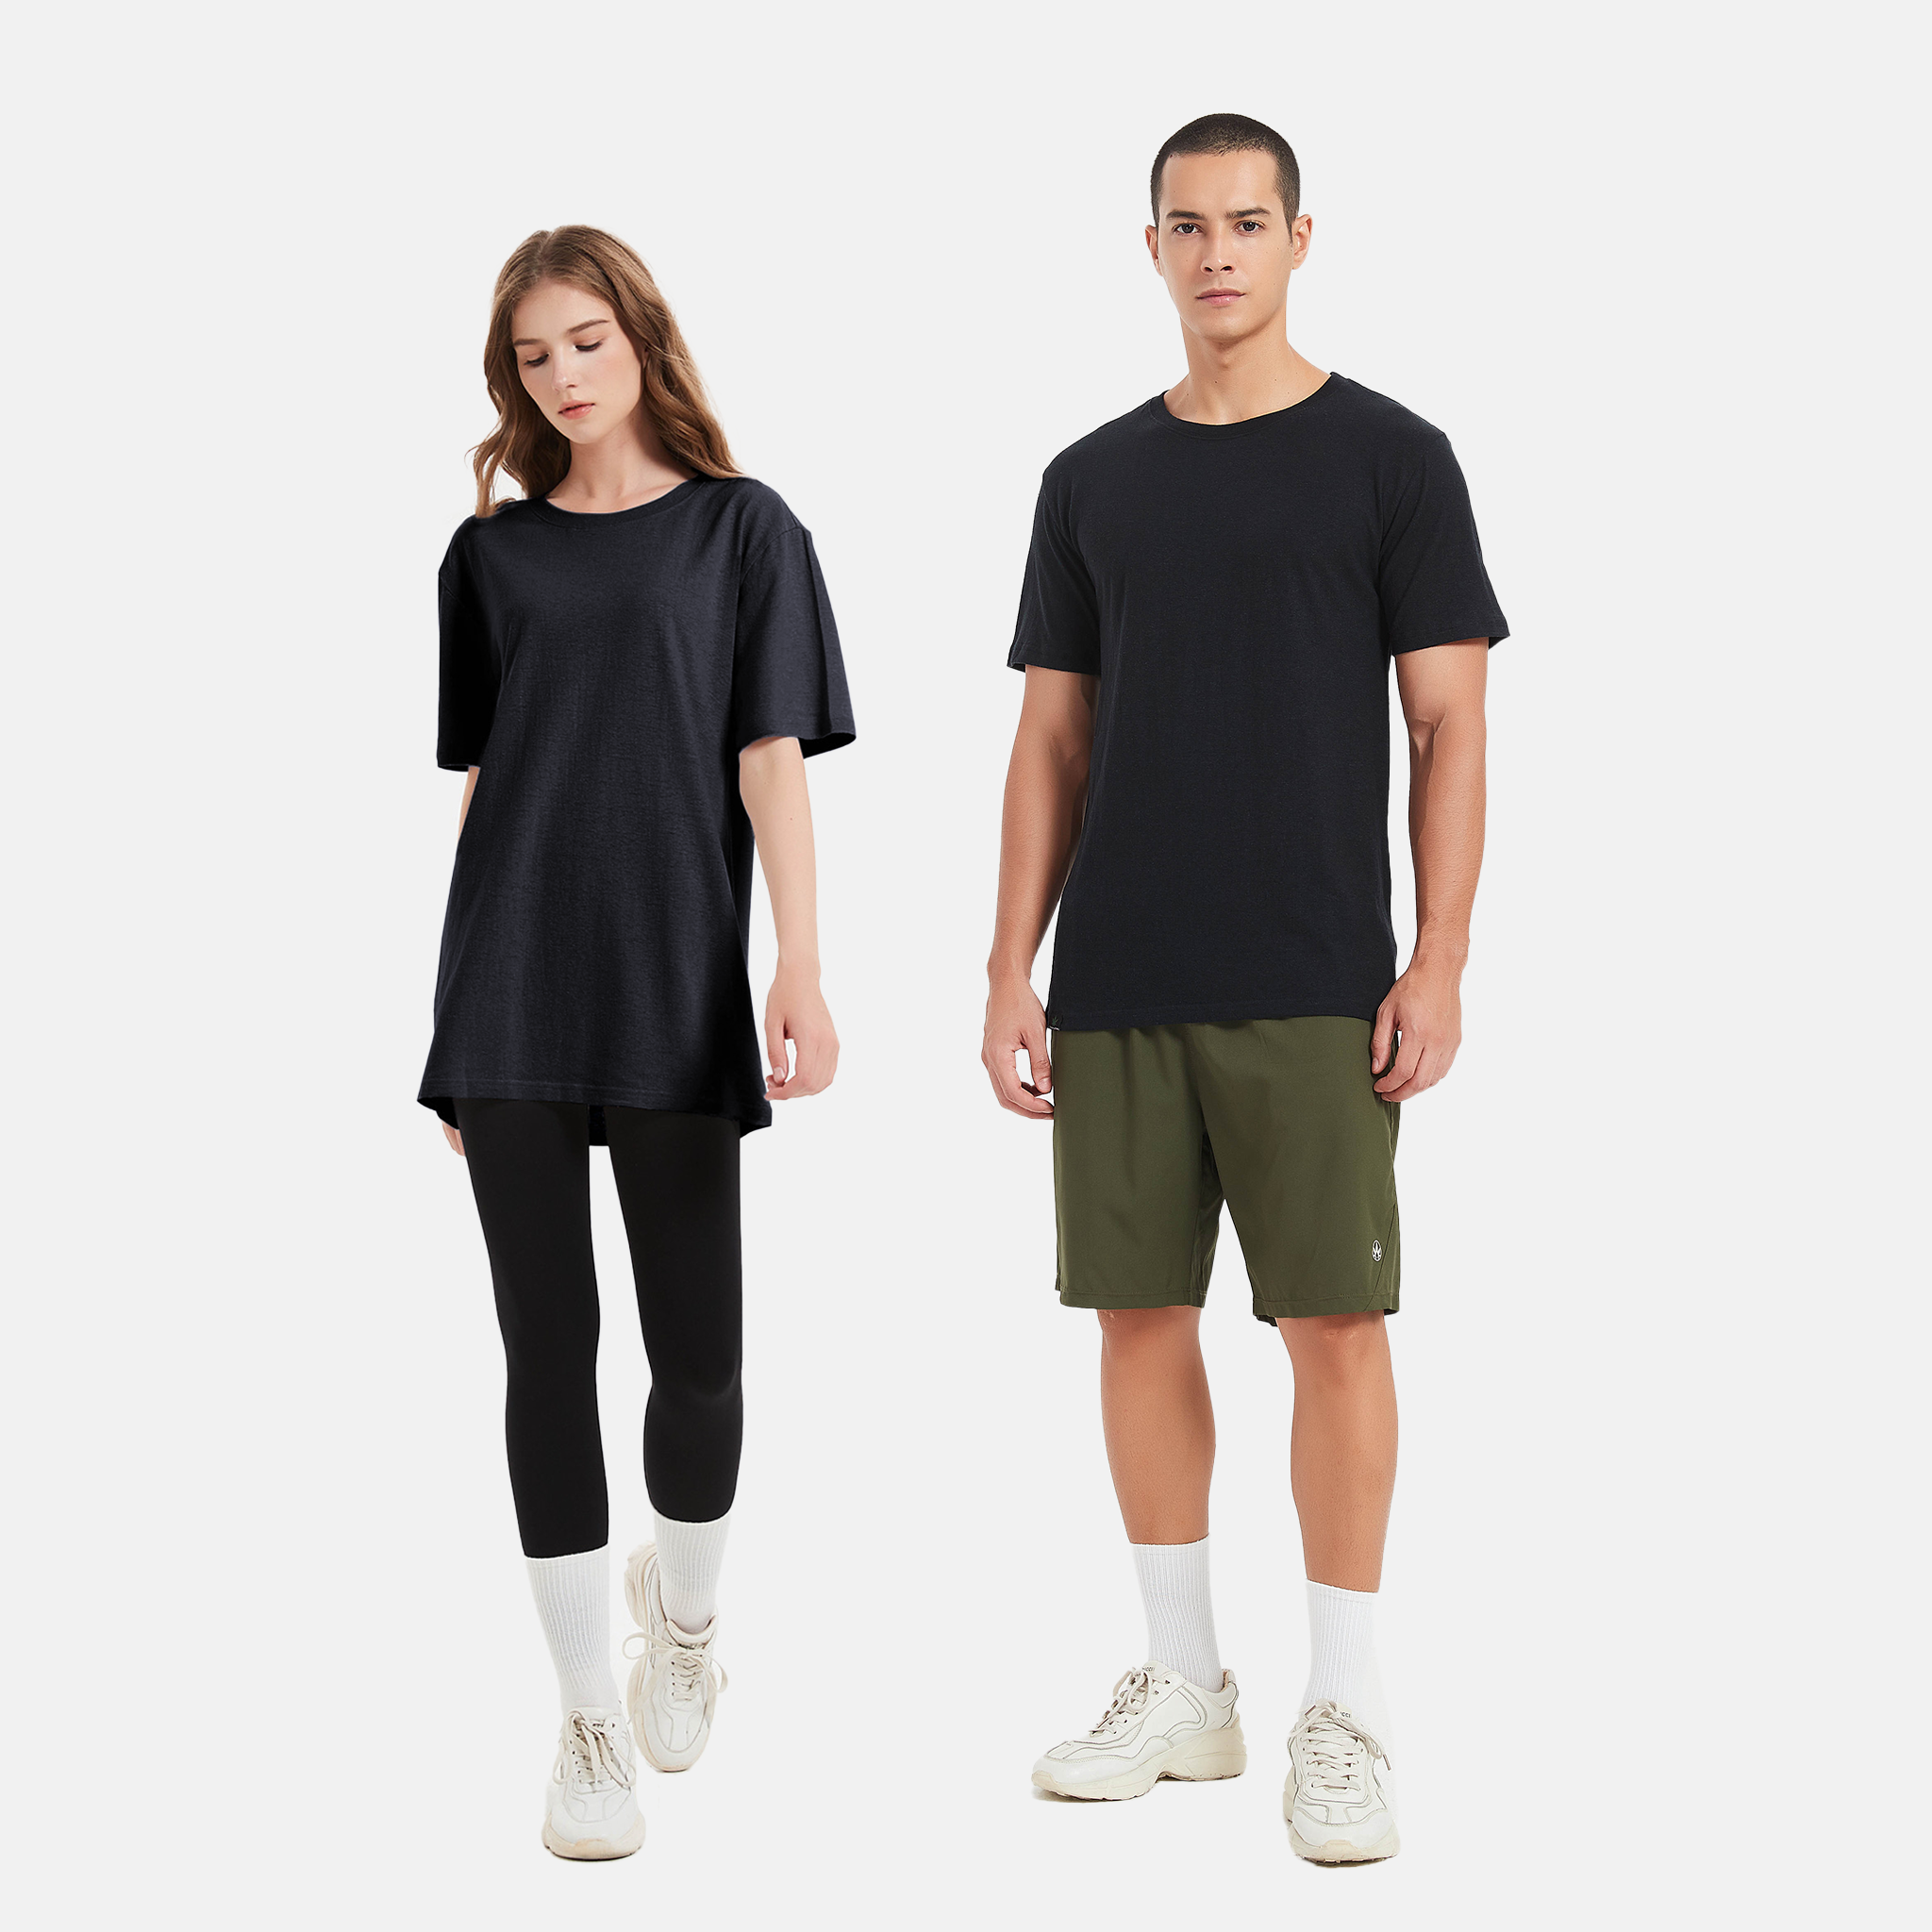 Classic black t-shirt, ideal for sustainable living, Mens and Womens